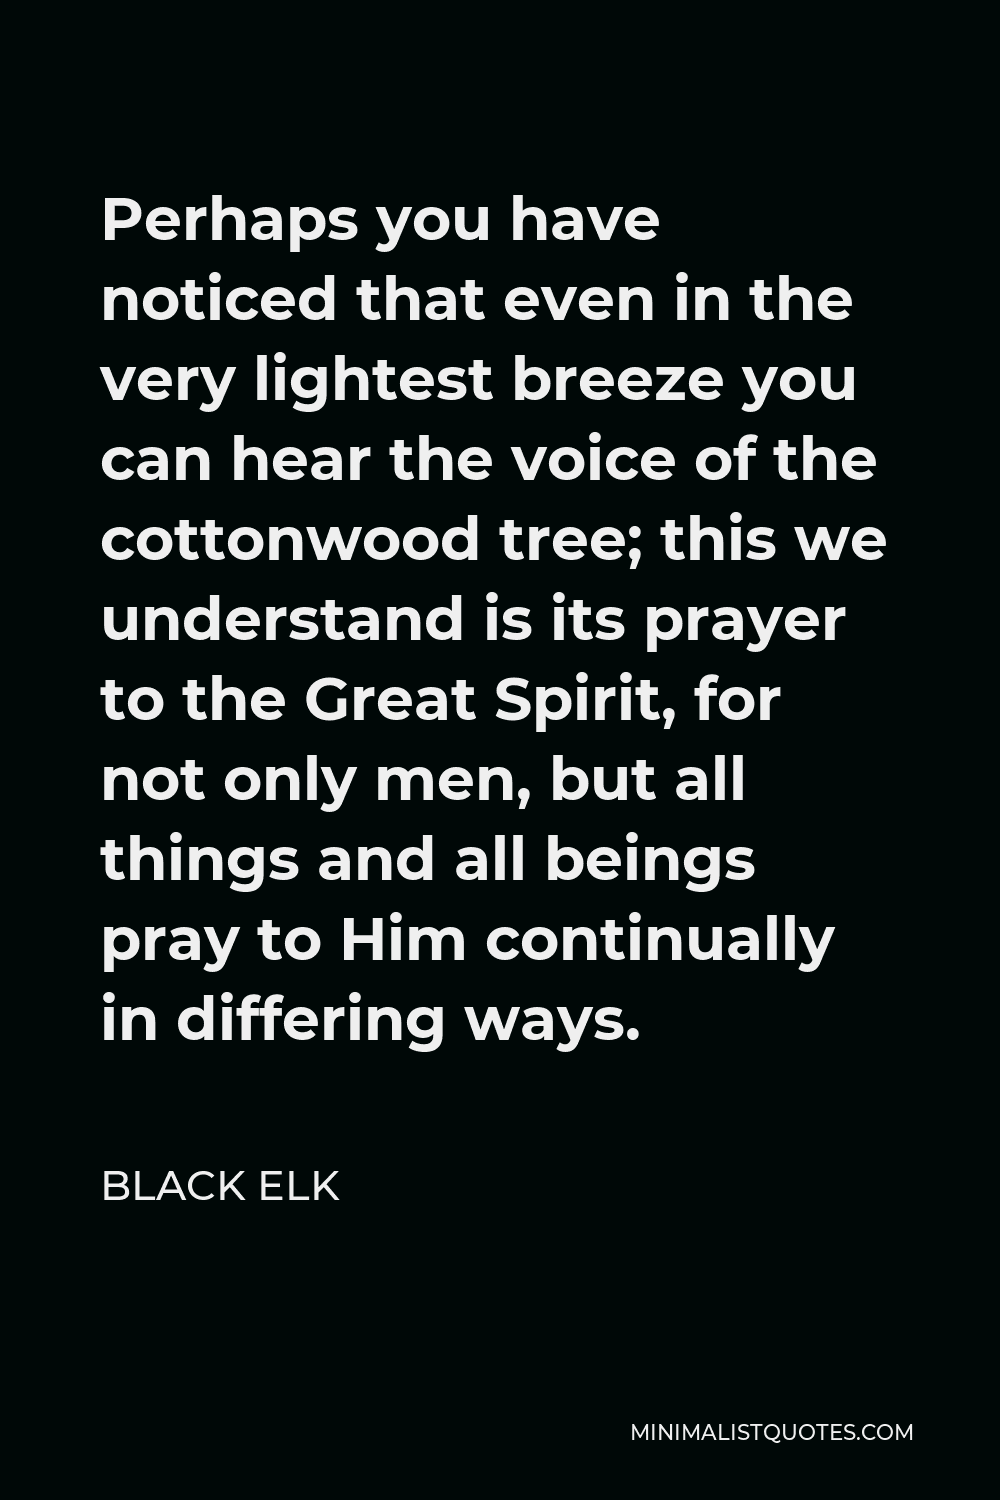 Black Elk Quote - Perhaps you have noticed that even in the very lightest breeze you can hear the voice of the cottonwood tree; this we understand is its prayer to the Great Spirit, for not only men, but all things and all beings pray to Him continually in differing ways.